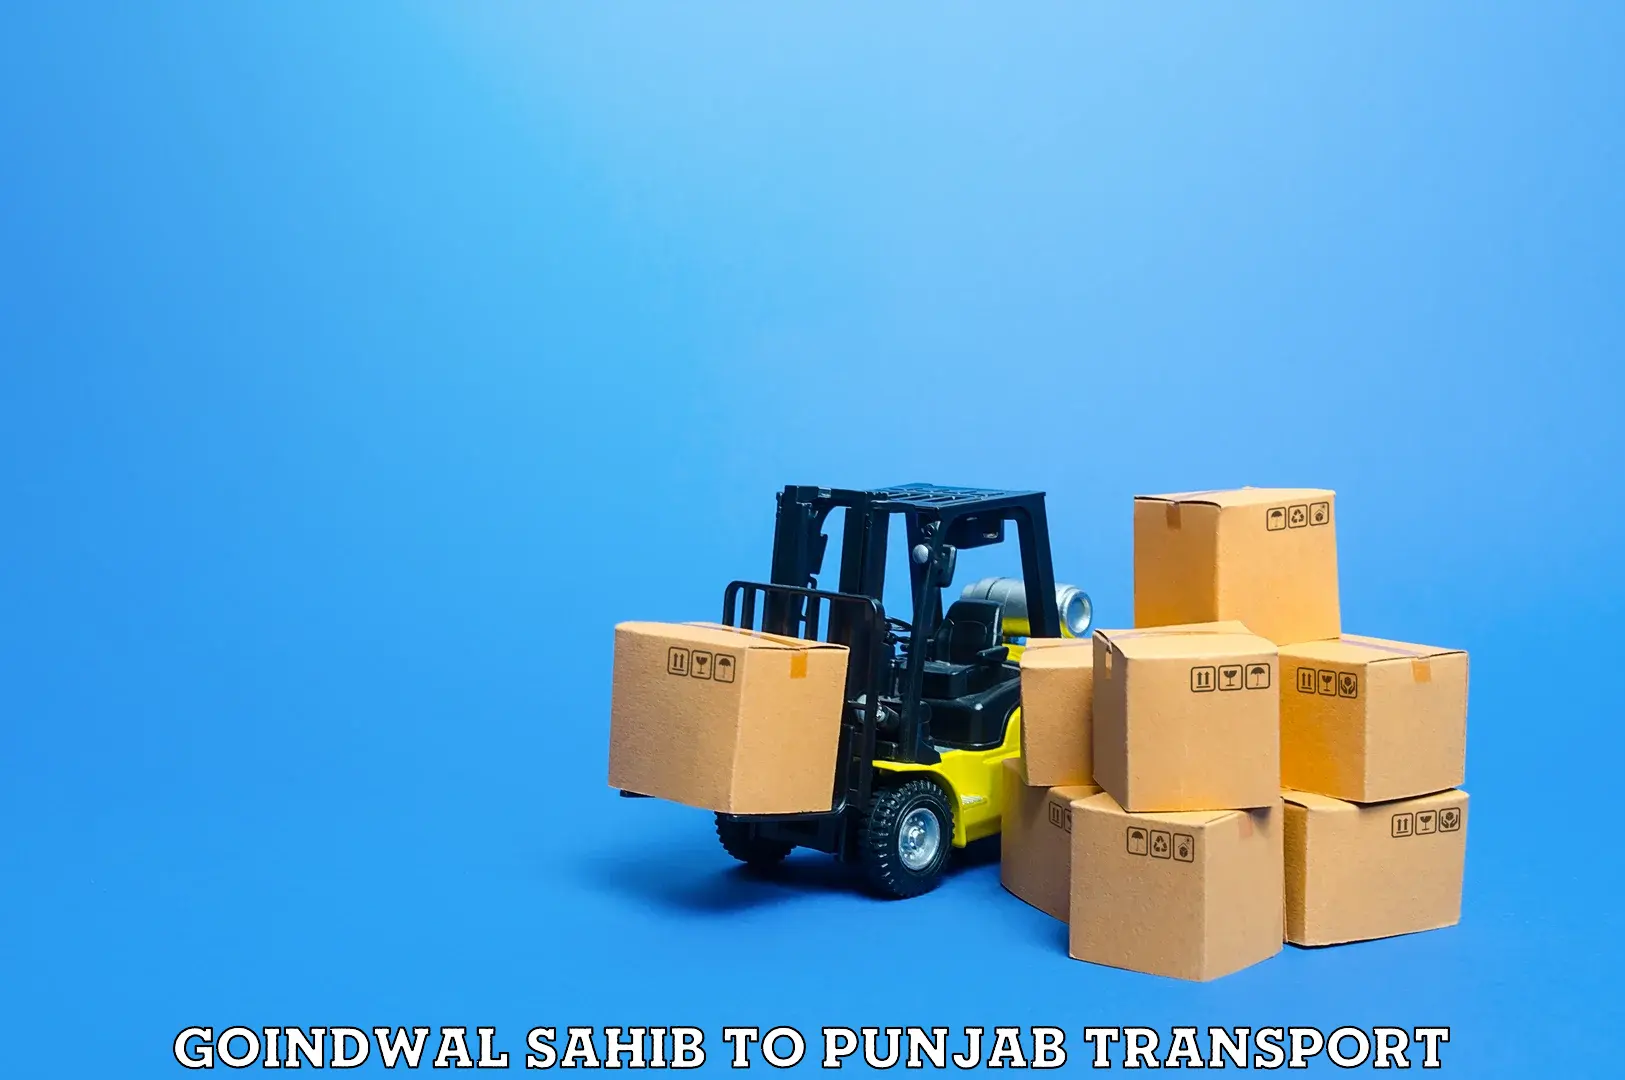 Goods delivery service Goindwal Sahib to Mukerian